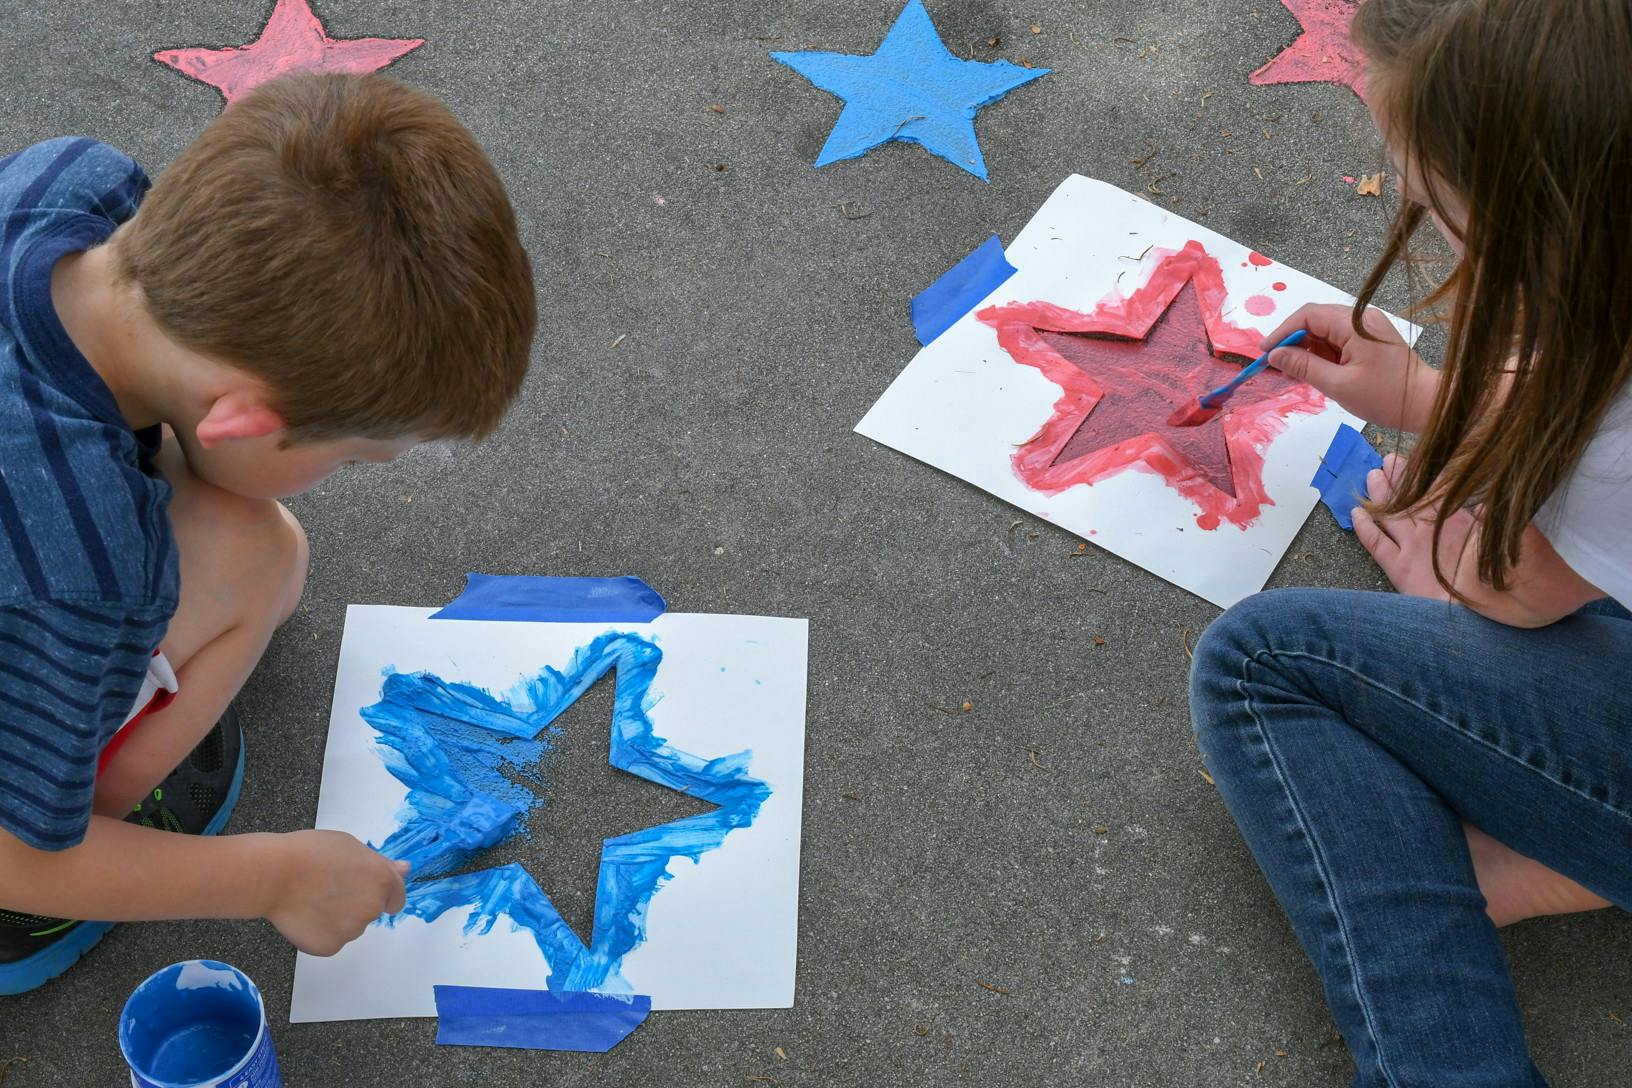 Two children using star-shaped stencils and sidewalk chalk paint to paint red and blue stars onto a driveway.